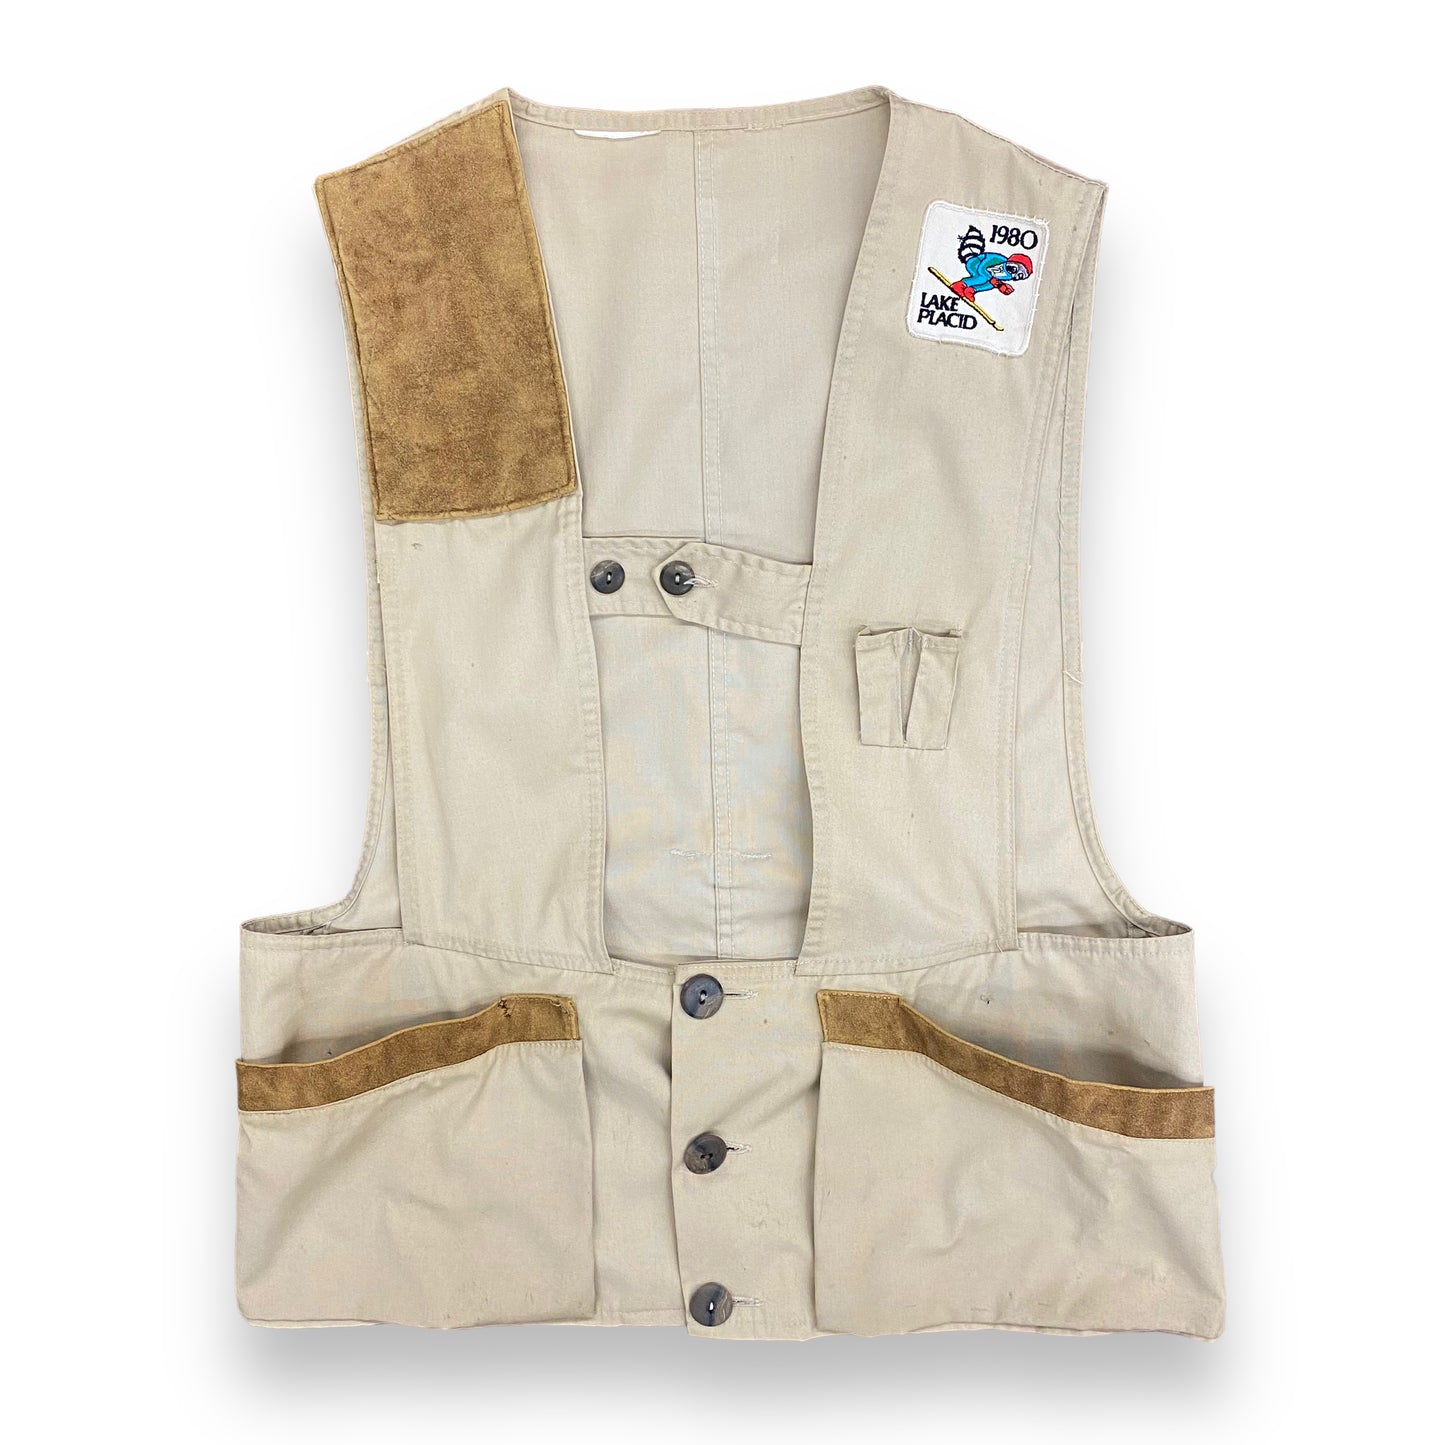 Vintage 1970s Tan Fishing Vest with "1980 Lake Placid" Olympic Patch - Size Medium